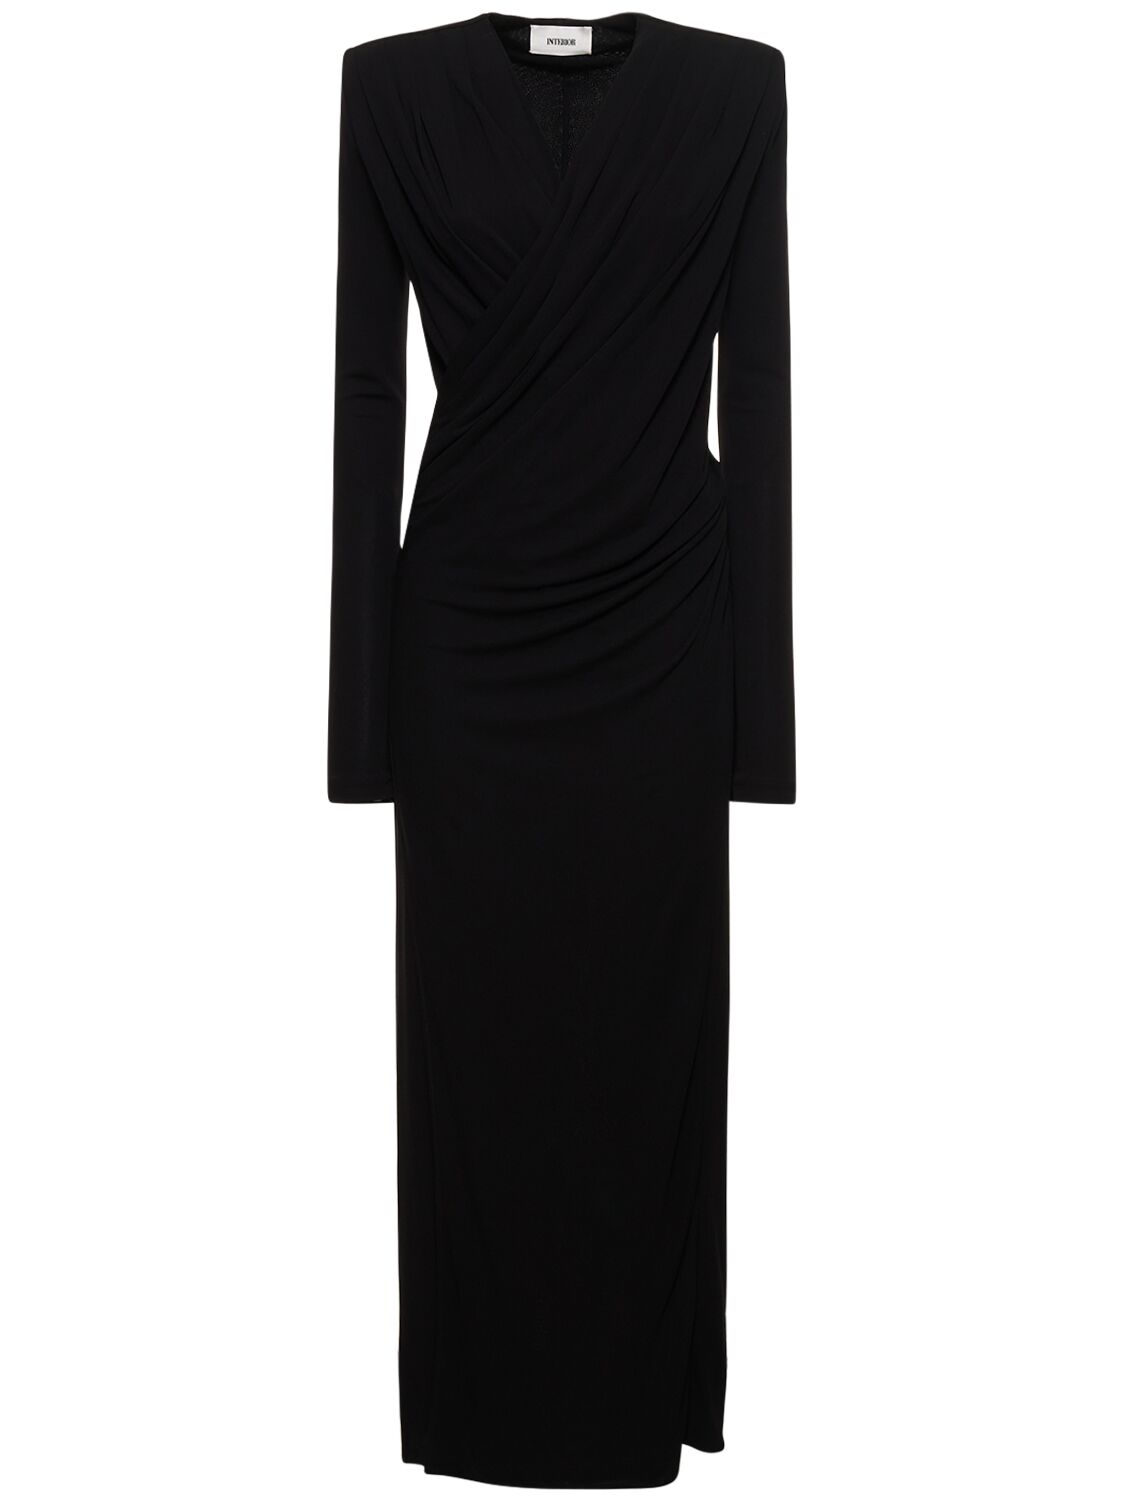 INTERIOR THE SLOAN KNITTED VISCOSE LONG DRESS